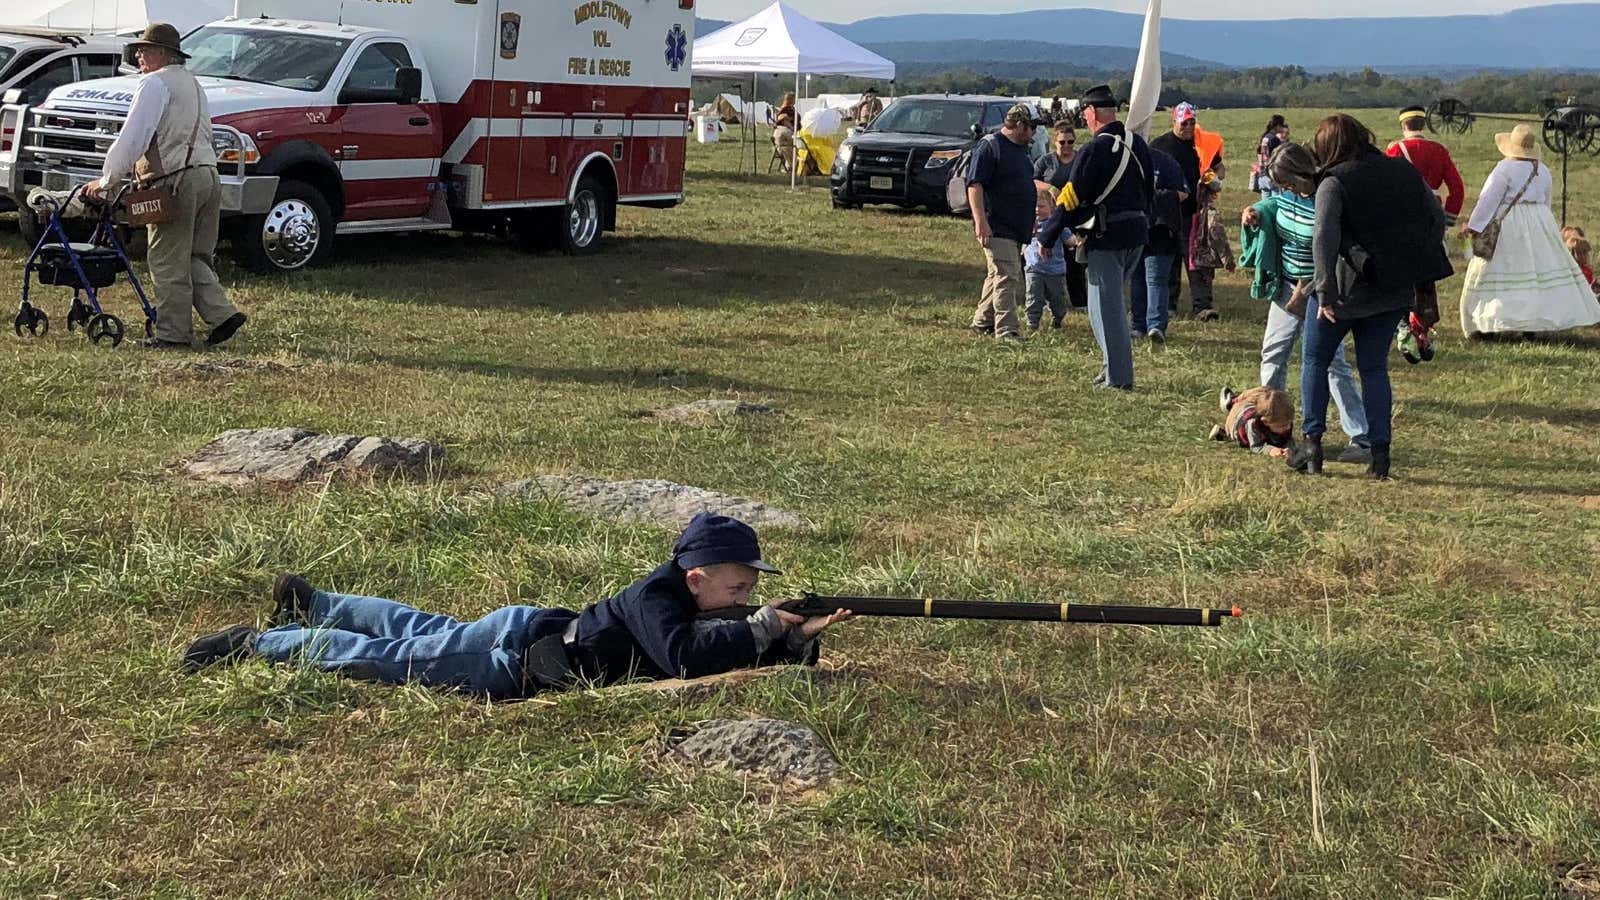 A child takes aim at the 2019 reenactment of the Battle of Cedar Creek, after the previous two were canceled due to bomb threats.